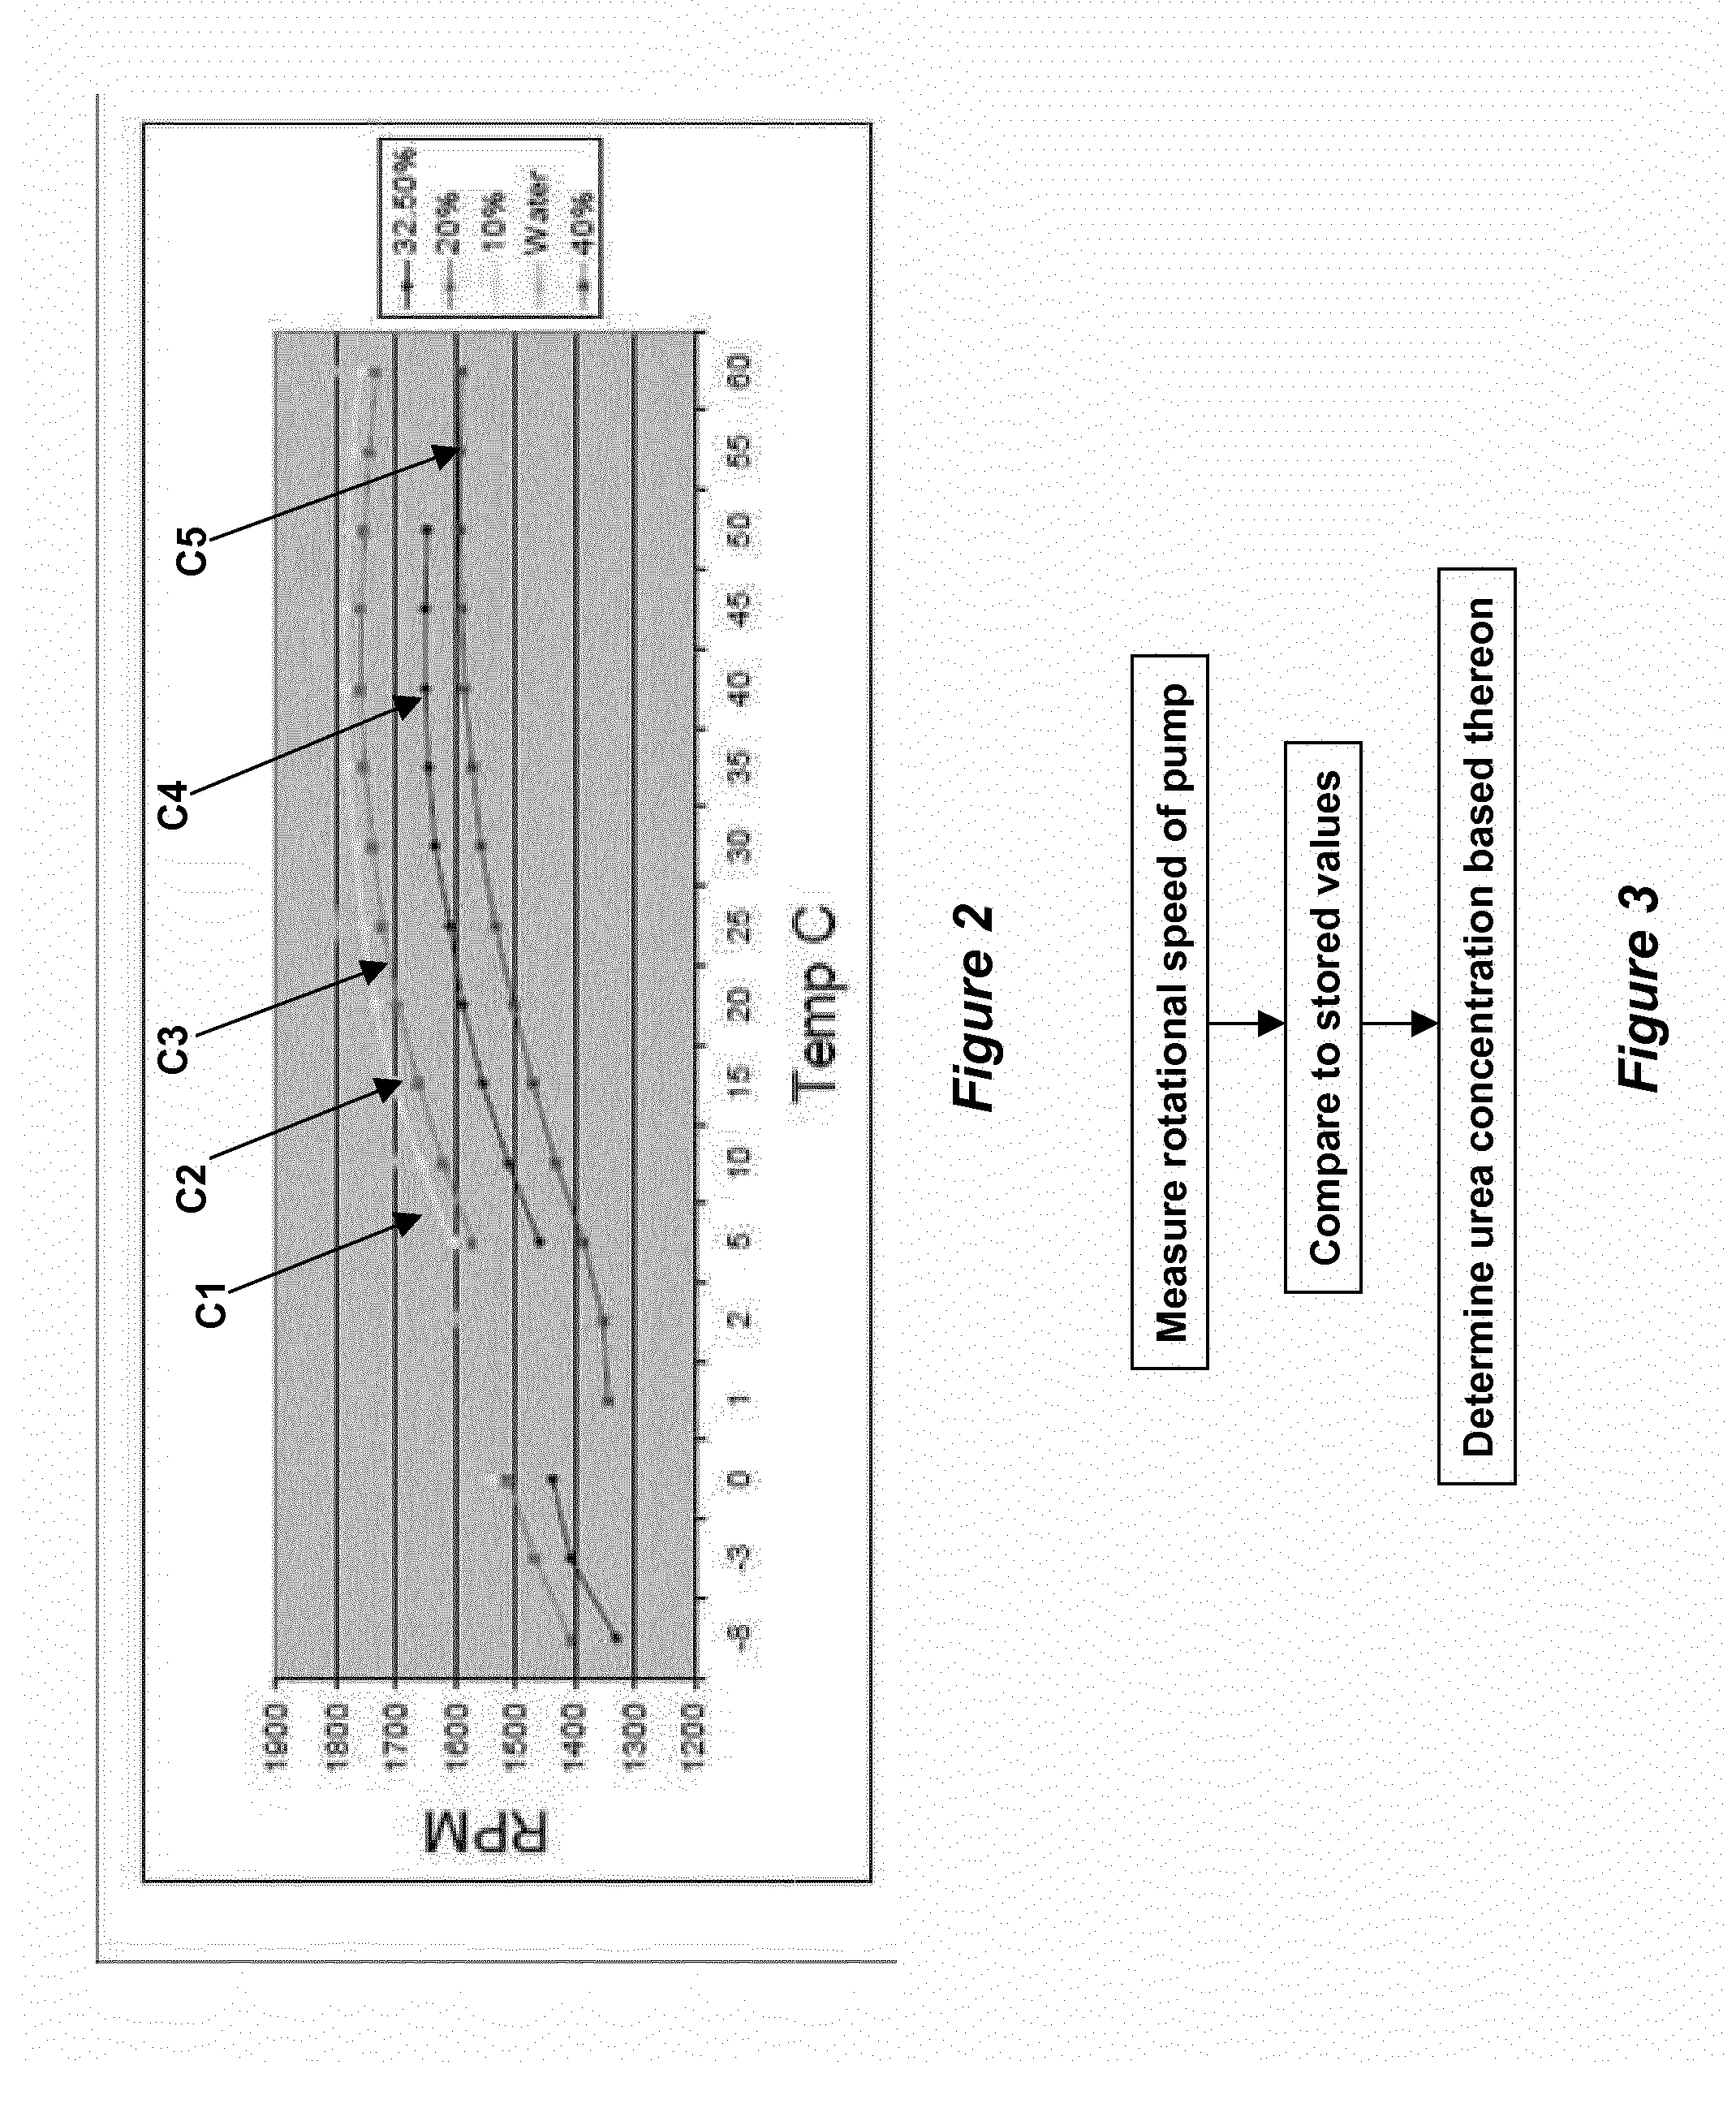 Method for monitoring urea quality of an scr system